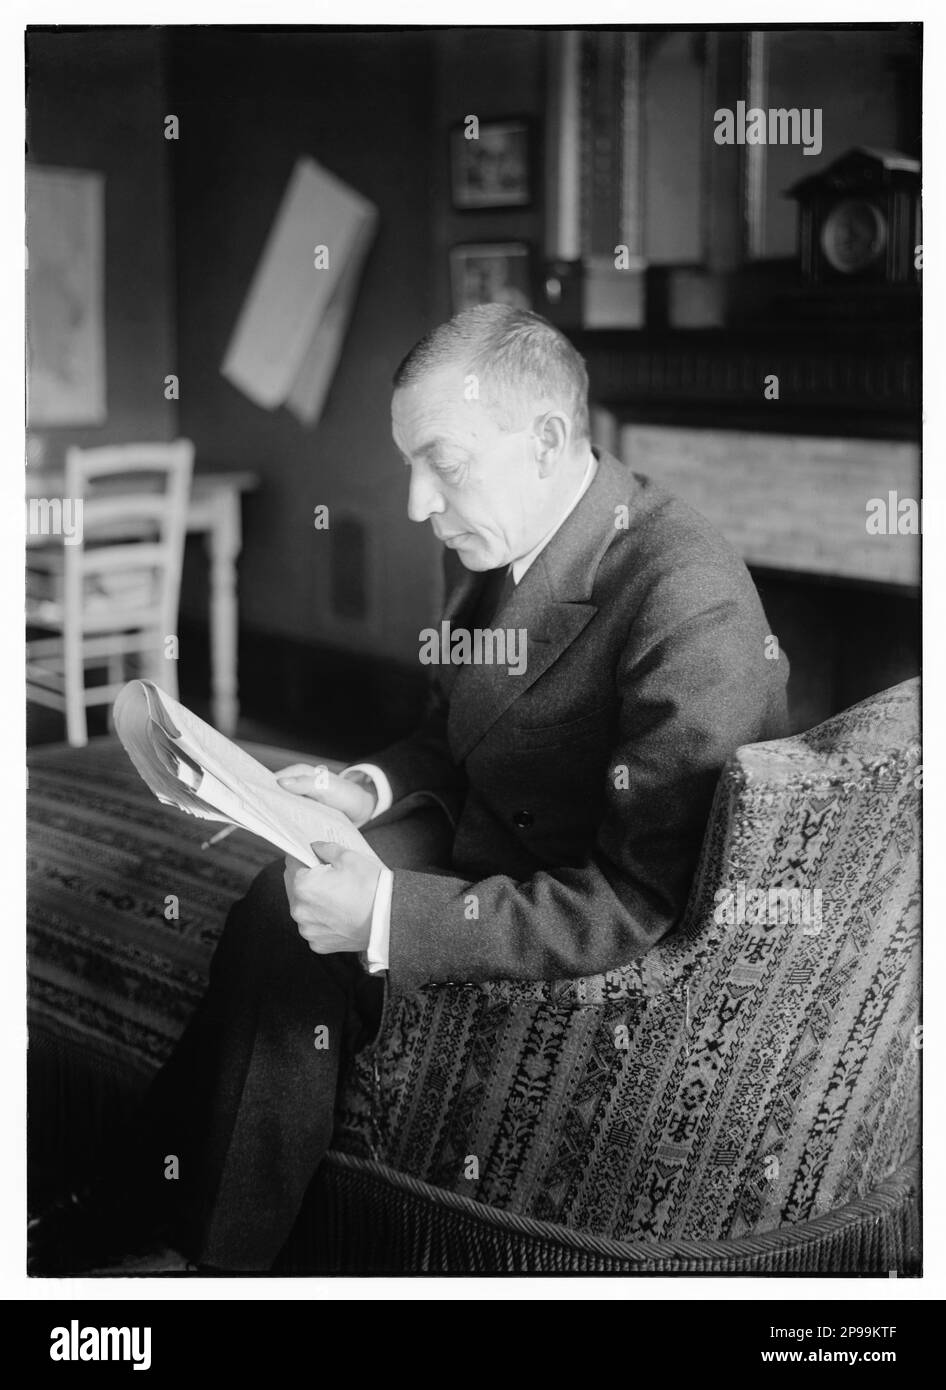 1920 , december , New York , USA : The russian music composer  and pianist SERGEI RACHMANINOFF ( Sergej Vasil'evic Rahmaninov - Sergej Vasilyevich Rachmaninov ) (Velikij Novgorod, Russia 1873 – Beverly Hills, USA 1943 ) . He had great success with the Opera ALEKO , four piano concertos and many others works . He was one of the greatest pianist of his time . Photograph by Bain , New York - PIANISTA - COMPOSITORE - OPERA LIRICA - CLASSICA - CLASSICAL - PORTRAIT - RITRATTO - MUSICISTA - MUSICA   - CRAVATTA - TIE - -- ARCHIVIO GBB Stock Photo